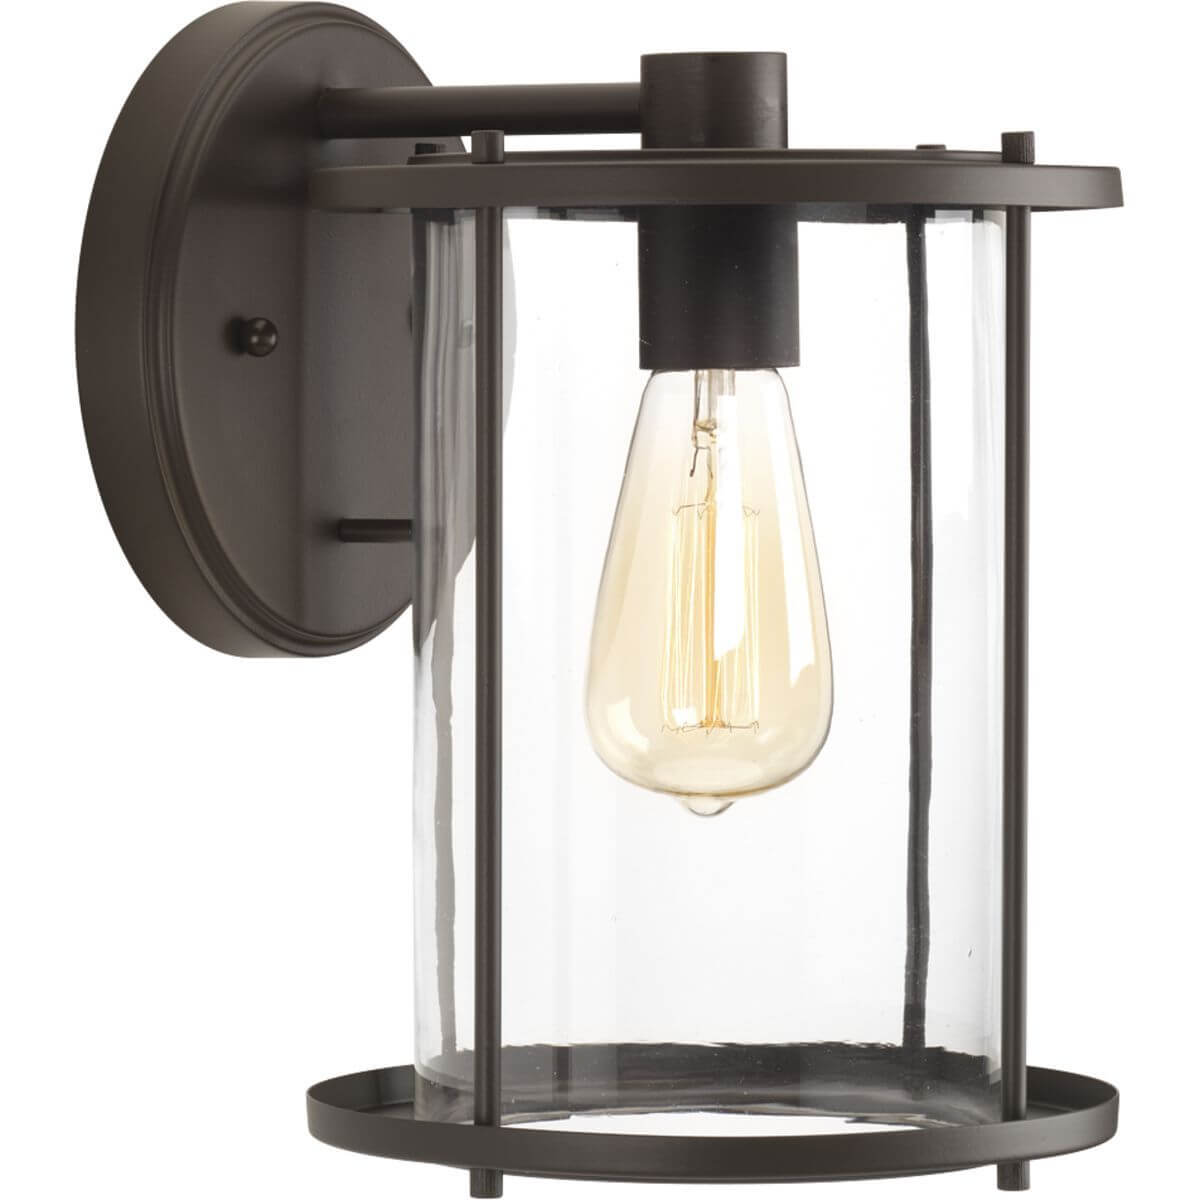 Progress Lighting P560058-020 Gunther 1 Light 12 inch Tall Outdoor Wall Lantern in Antique Bronze with Clear Glass